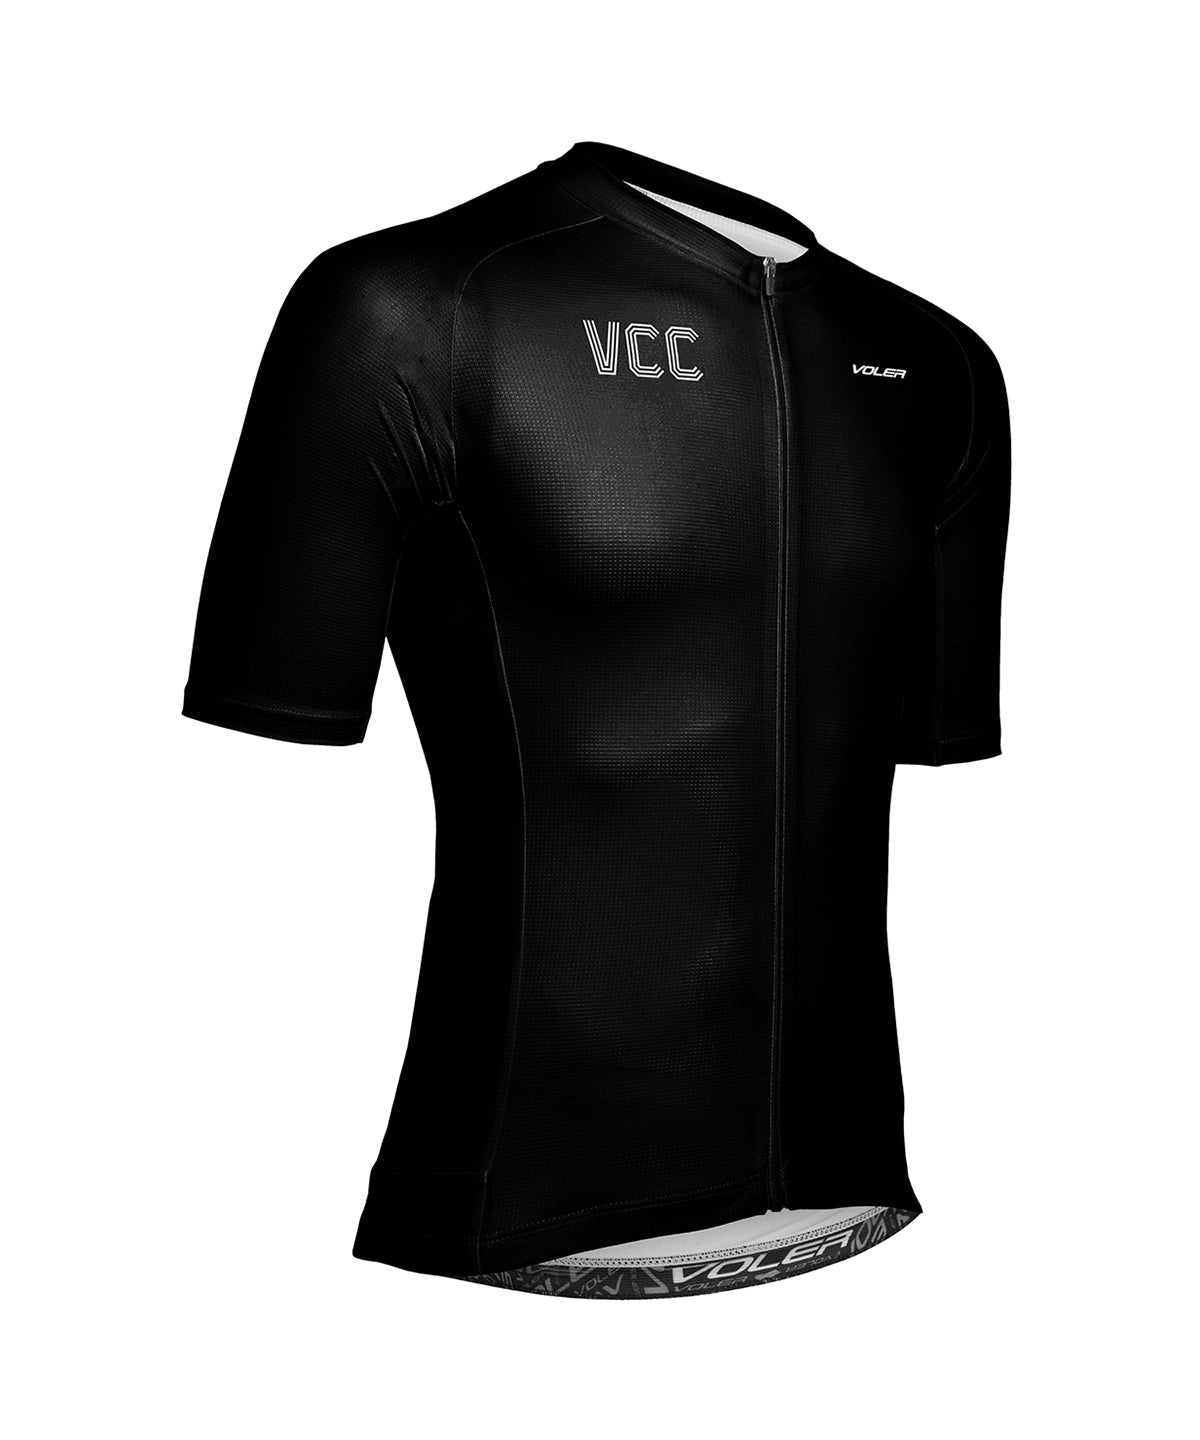 M. VELOCITY AIR JERSEY - VCC MEMBERS ONLY